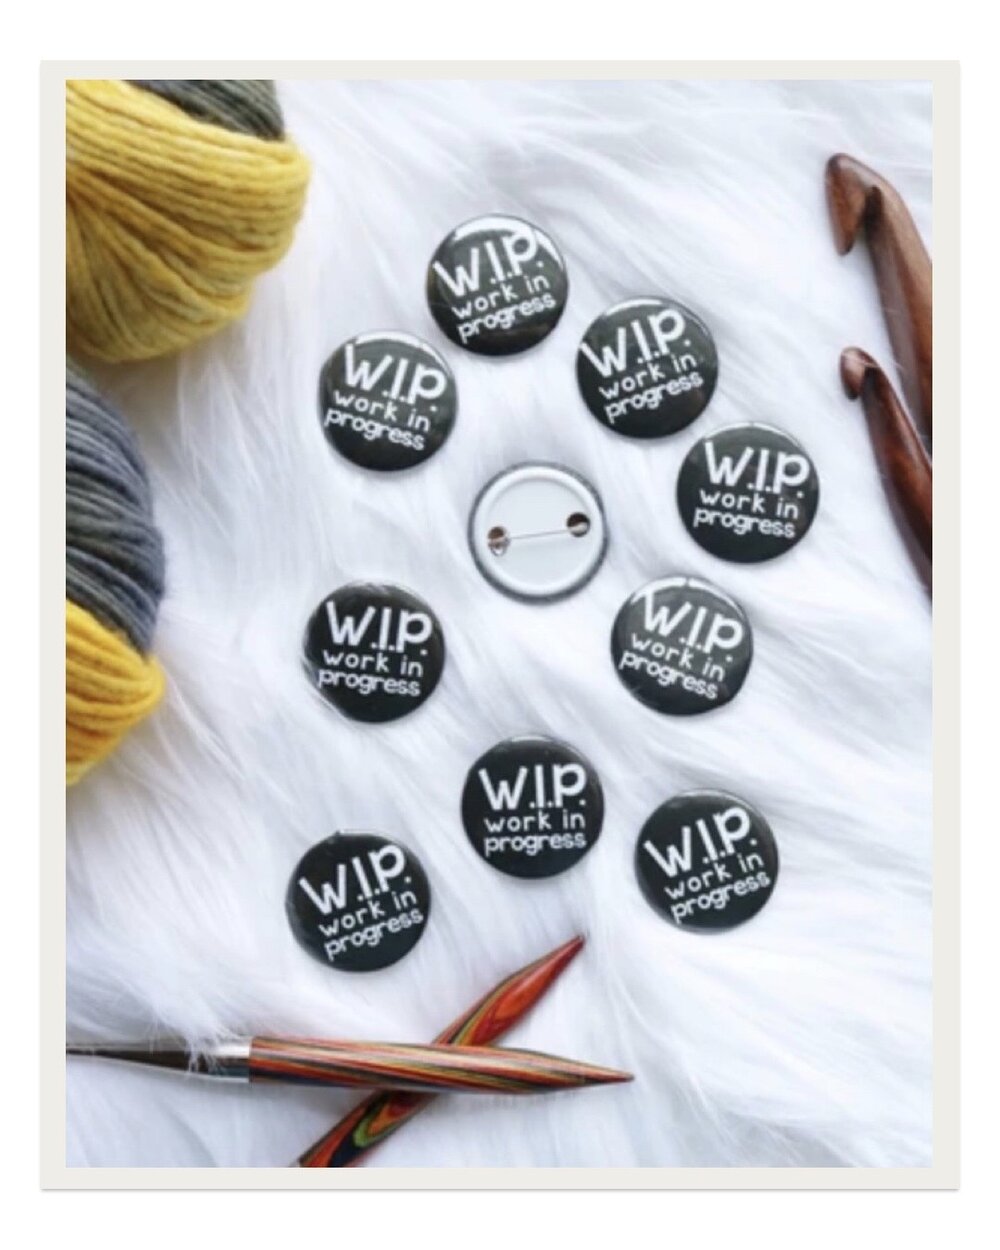 Leave it to Toni of TL Yarn Crafts to create the CUTEST modern knit and crochet accessories. Her mugs from a few years ago are still my go-to for morning coffee and tea, and her collection of pins like these “Work in Progress” ones are the perfect stocking stuffer.